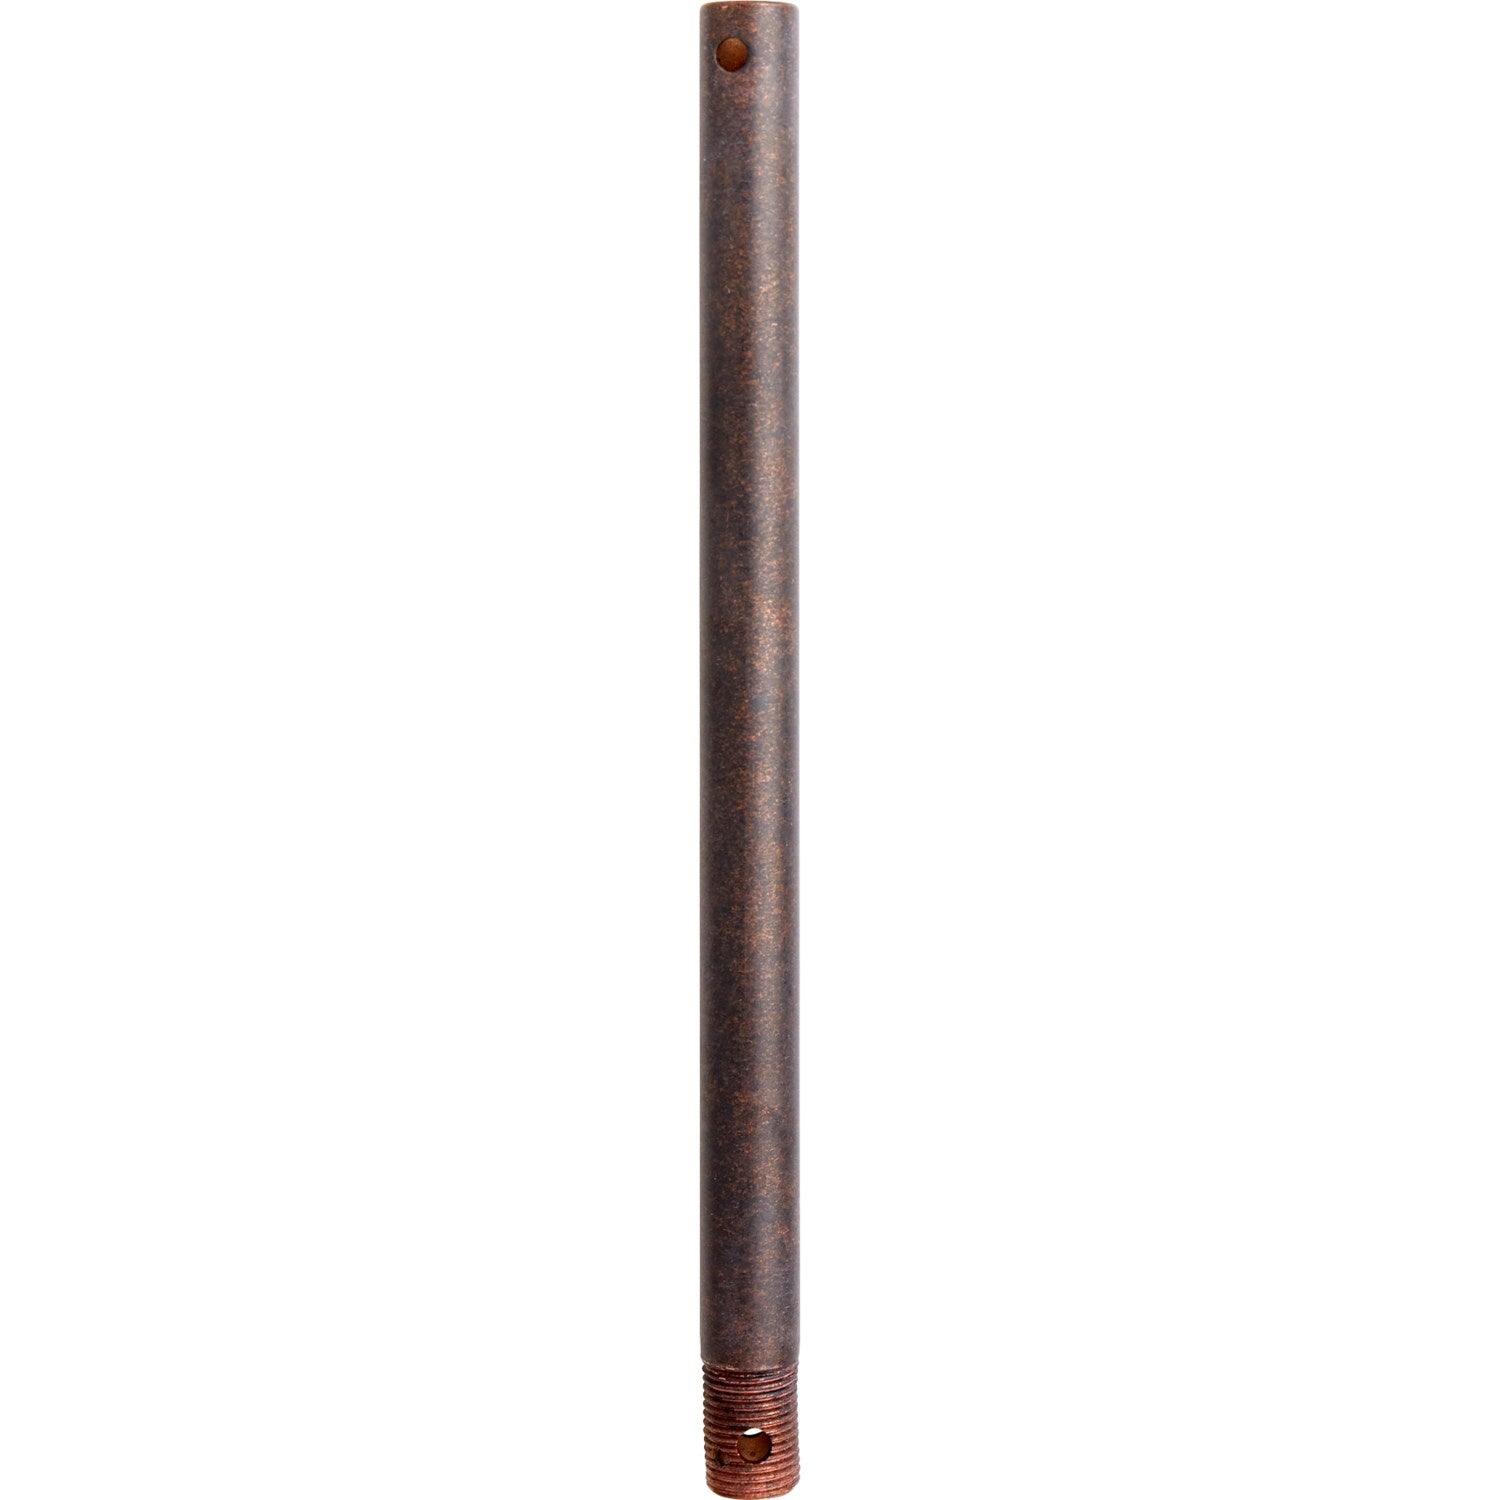 Quorum - 6-1244 - Downrod - 12 in. Downrods - Toasted Sienna